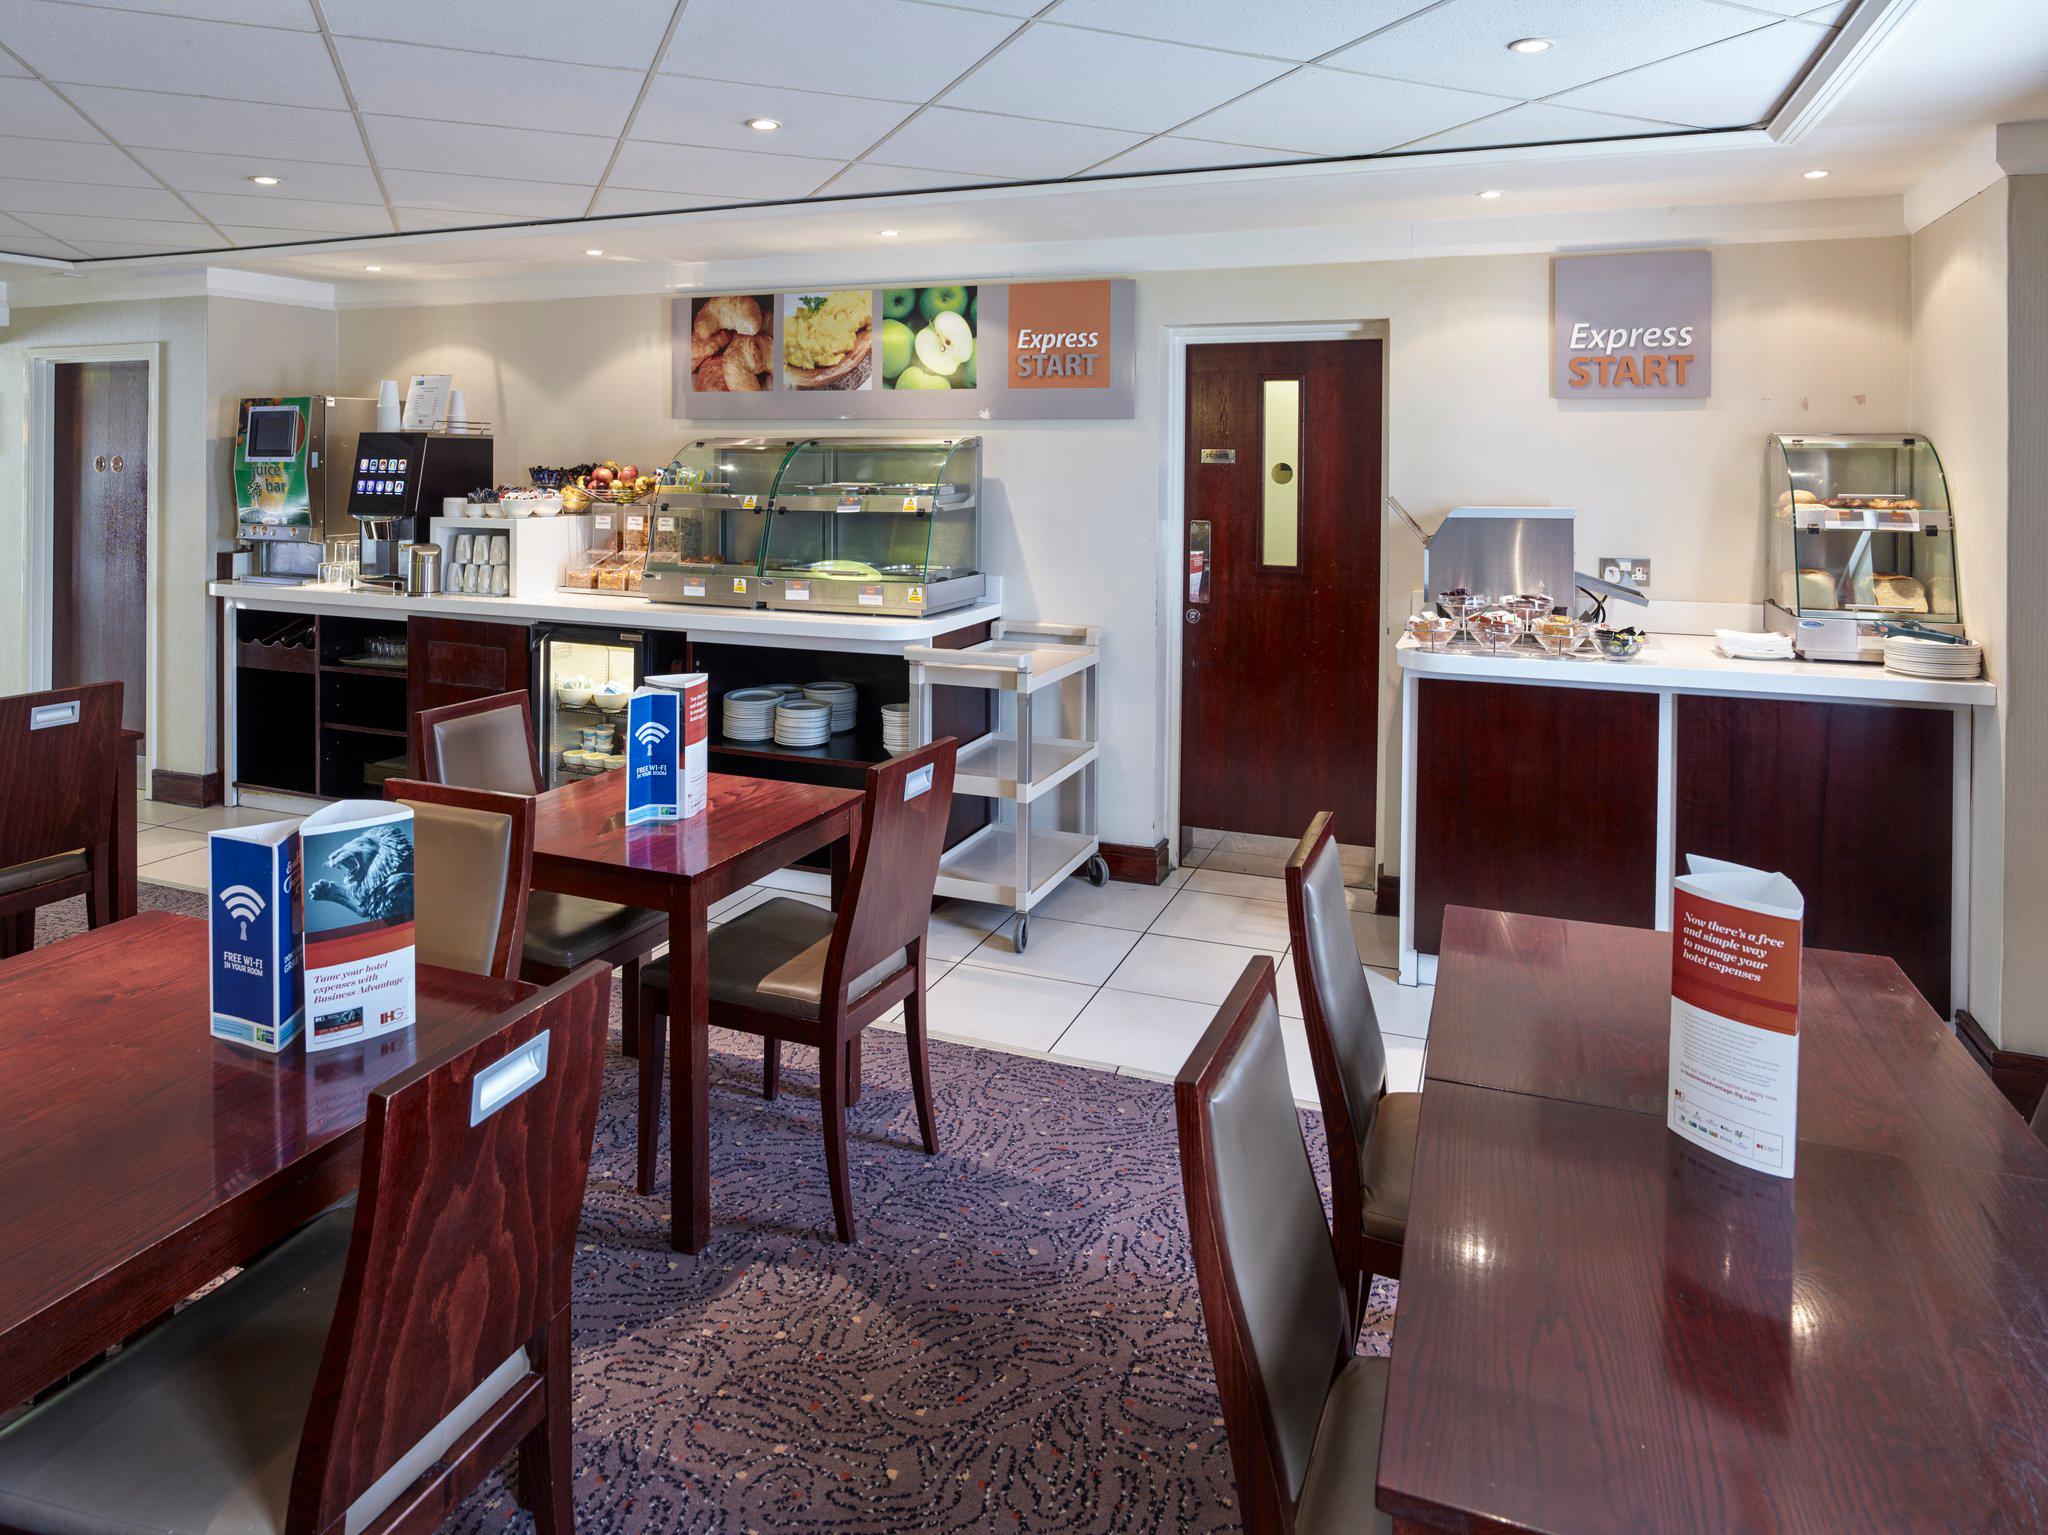 Holiday Inn Express Glenrothes, an IHG Hotel Glenrothes 01592 745509